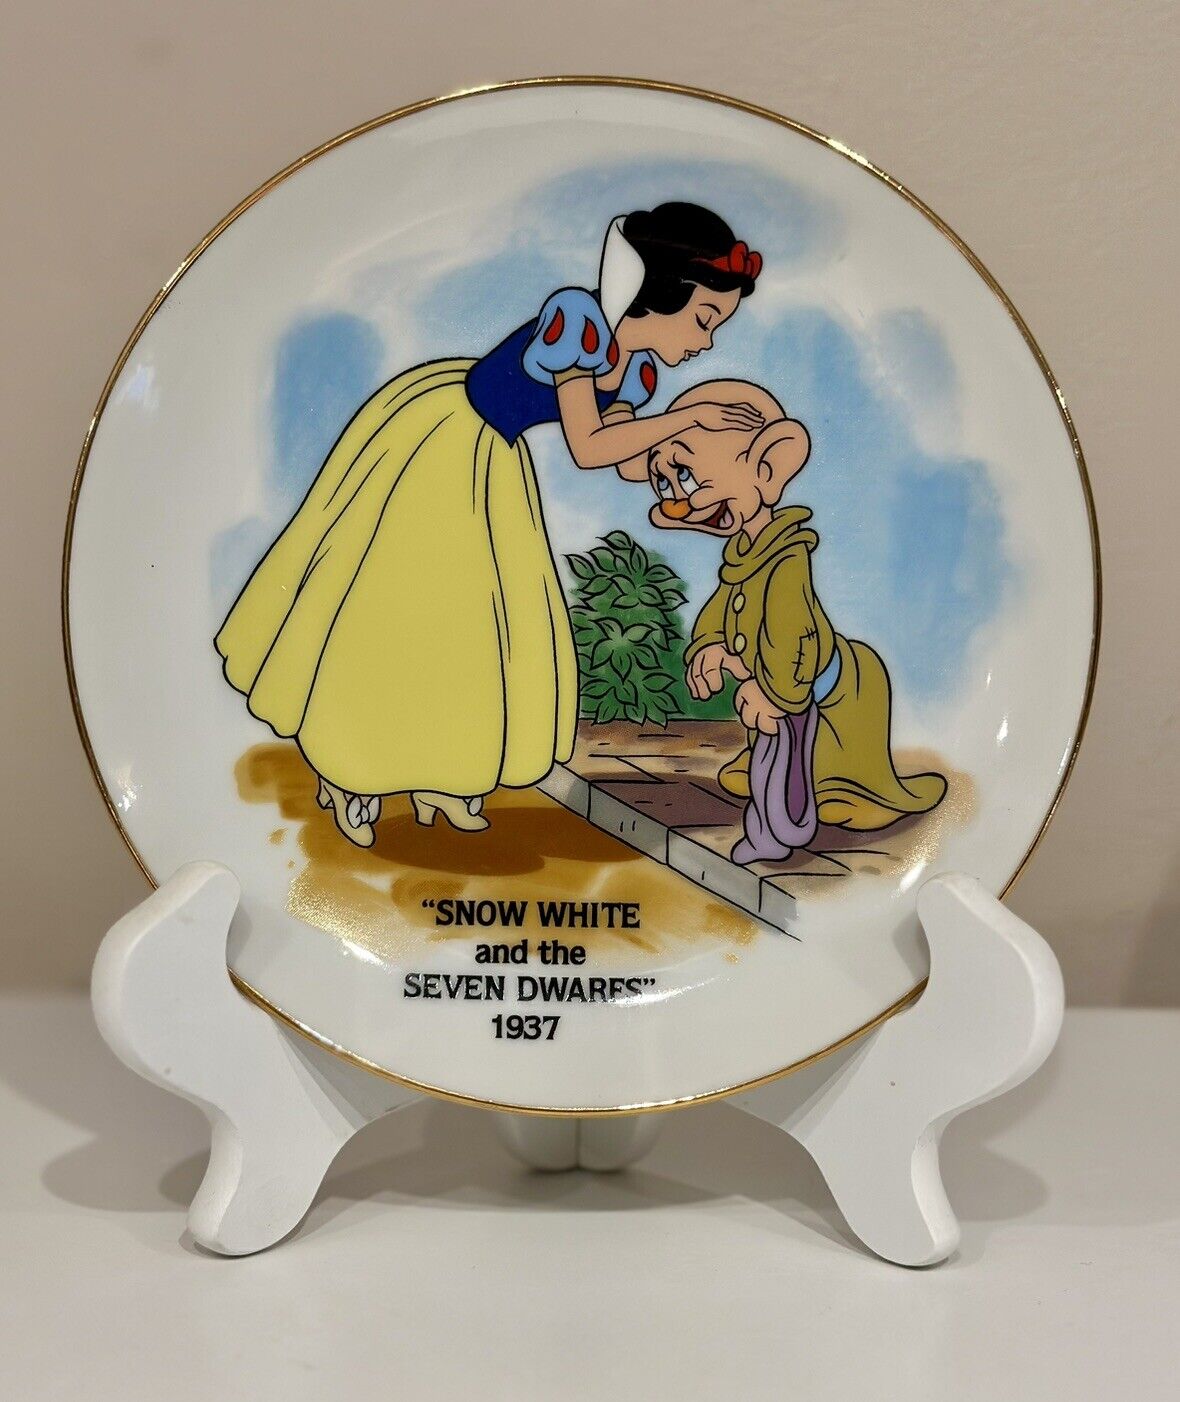 VTG Disney Snow White and the Seven Dwarfs 1937, A Kiss for Dopey Plate, 6 1/4